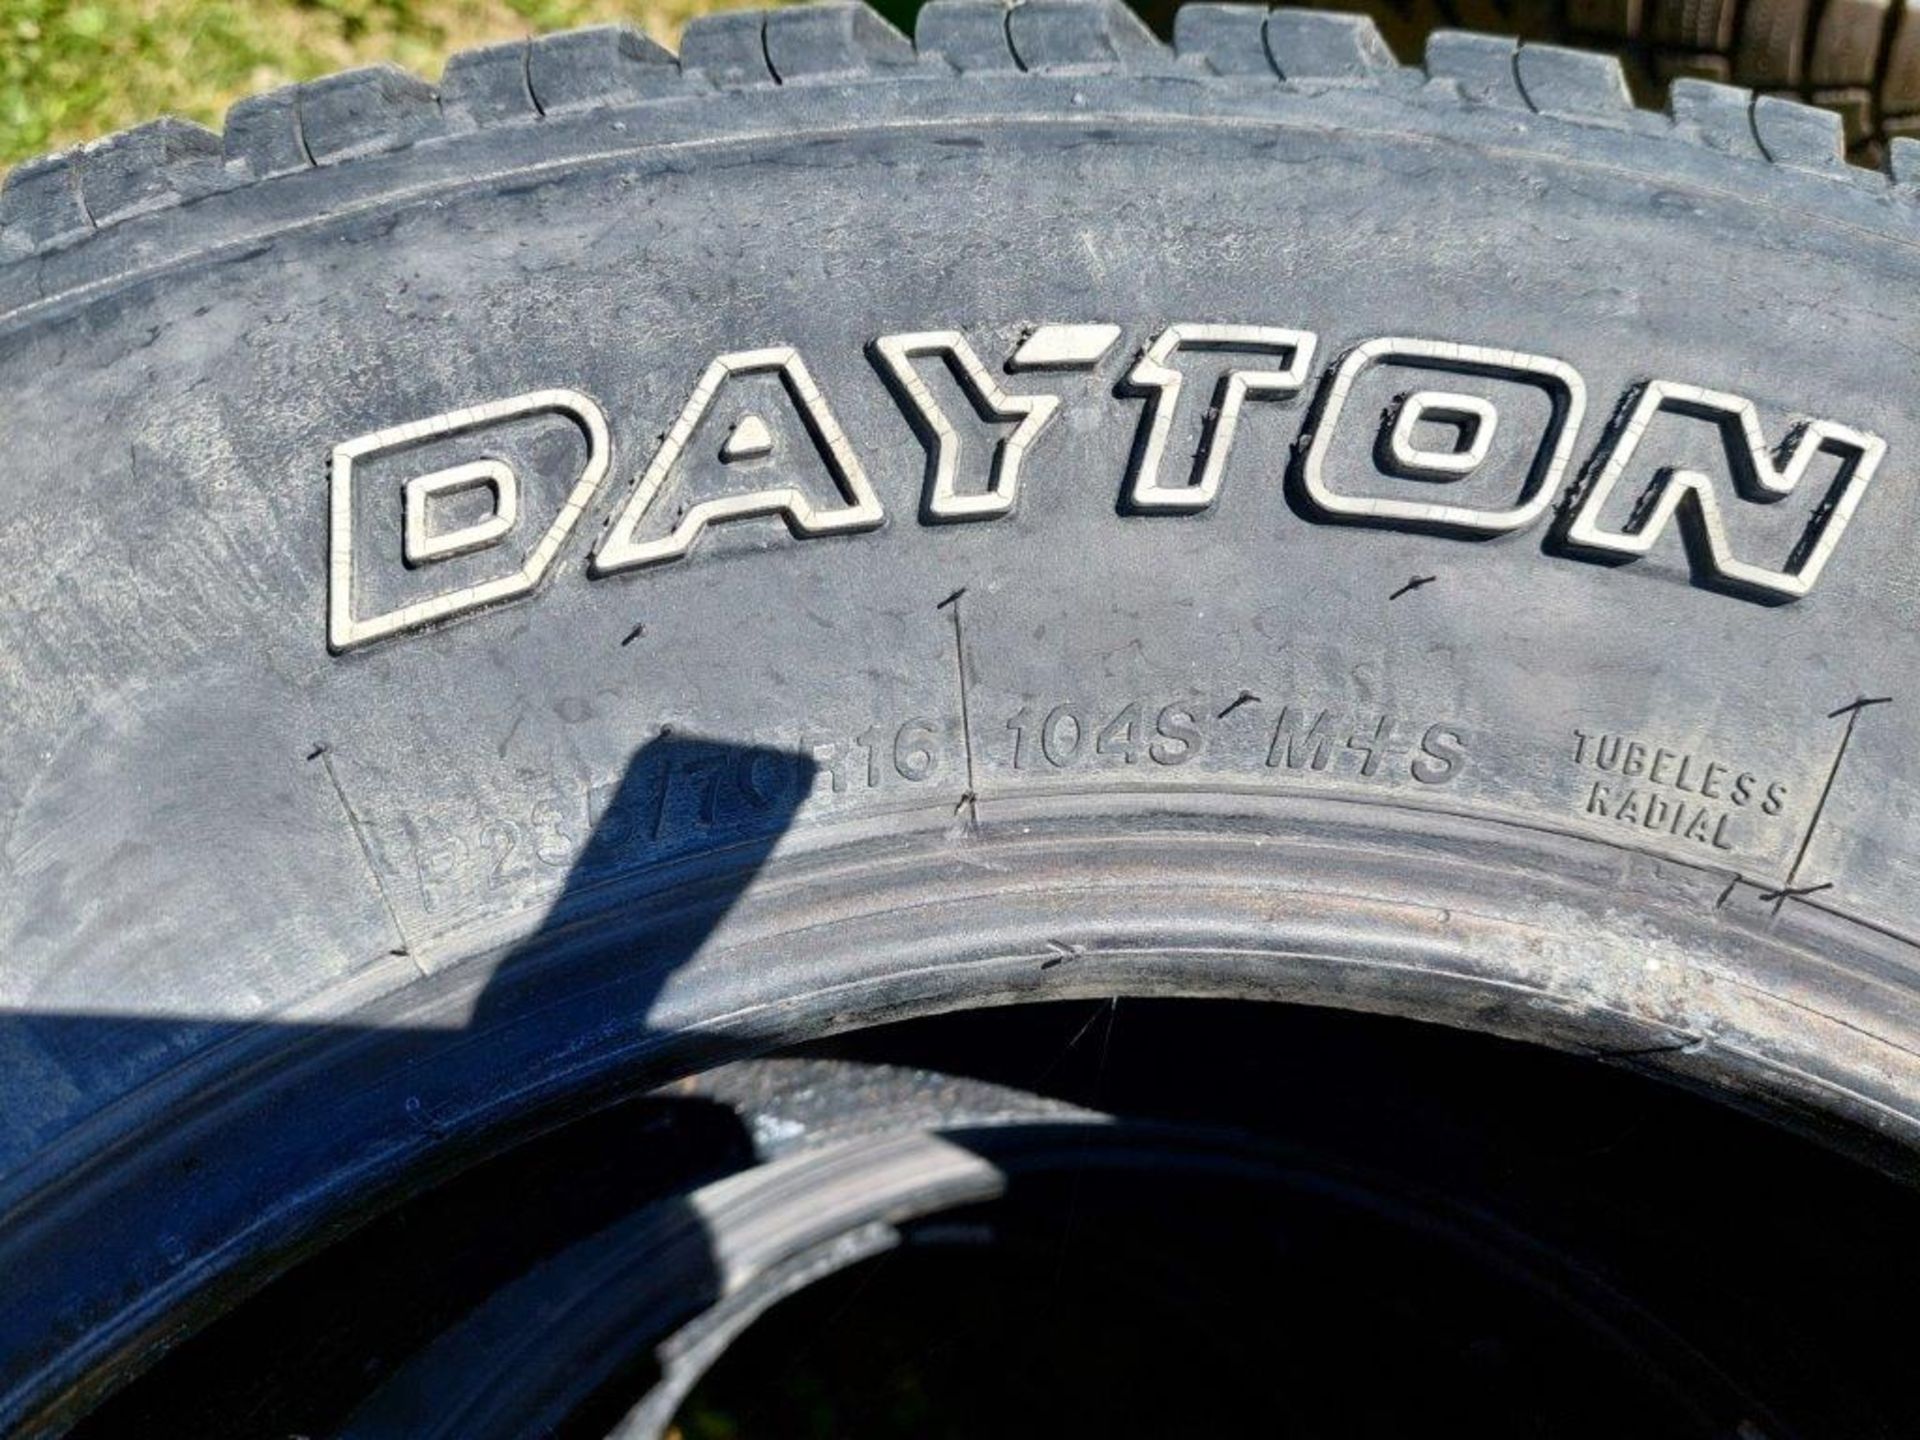 4-DAYTON TIMBERLINE AT TIRES P235/70R16 104S M&S - Image 2 of 2